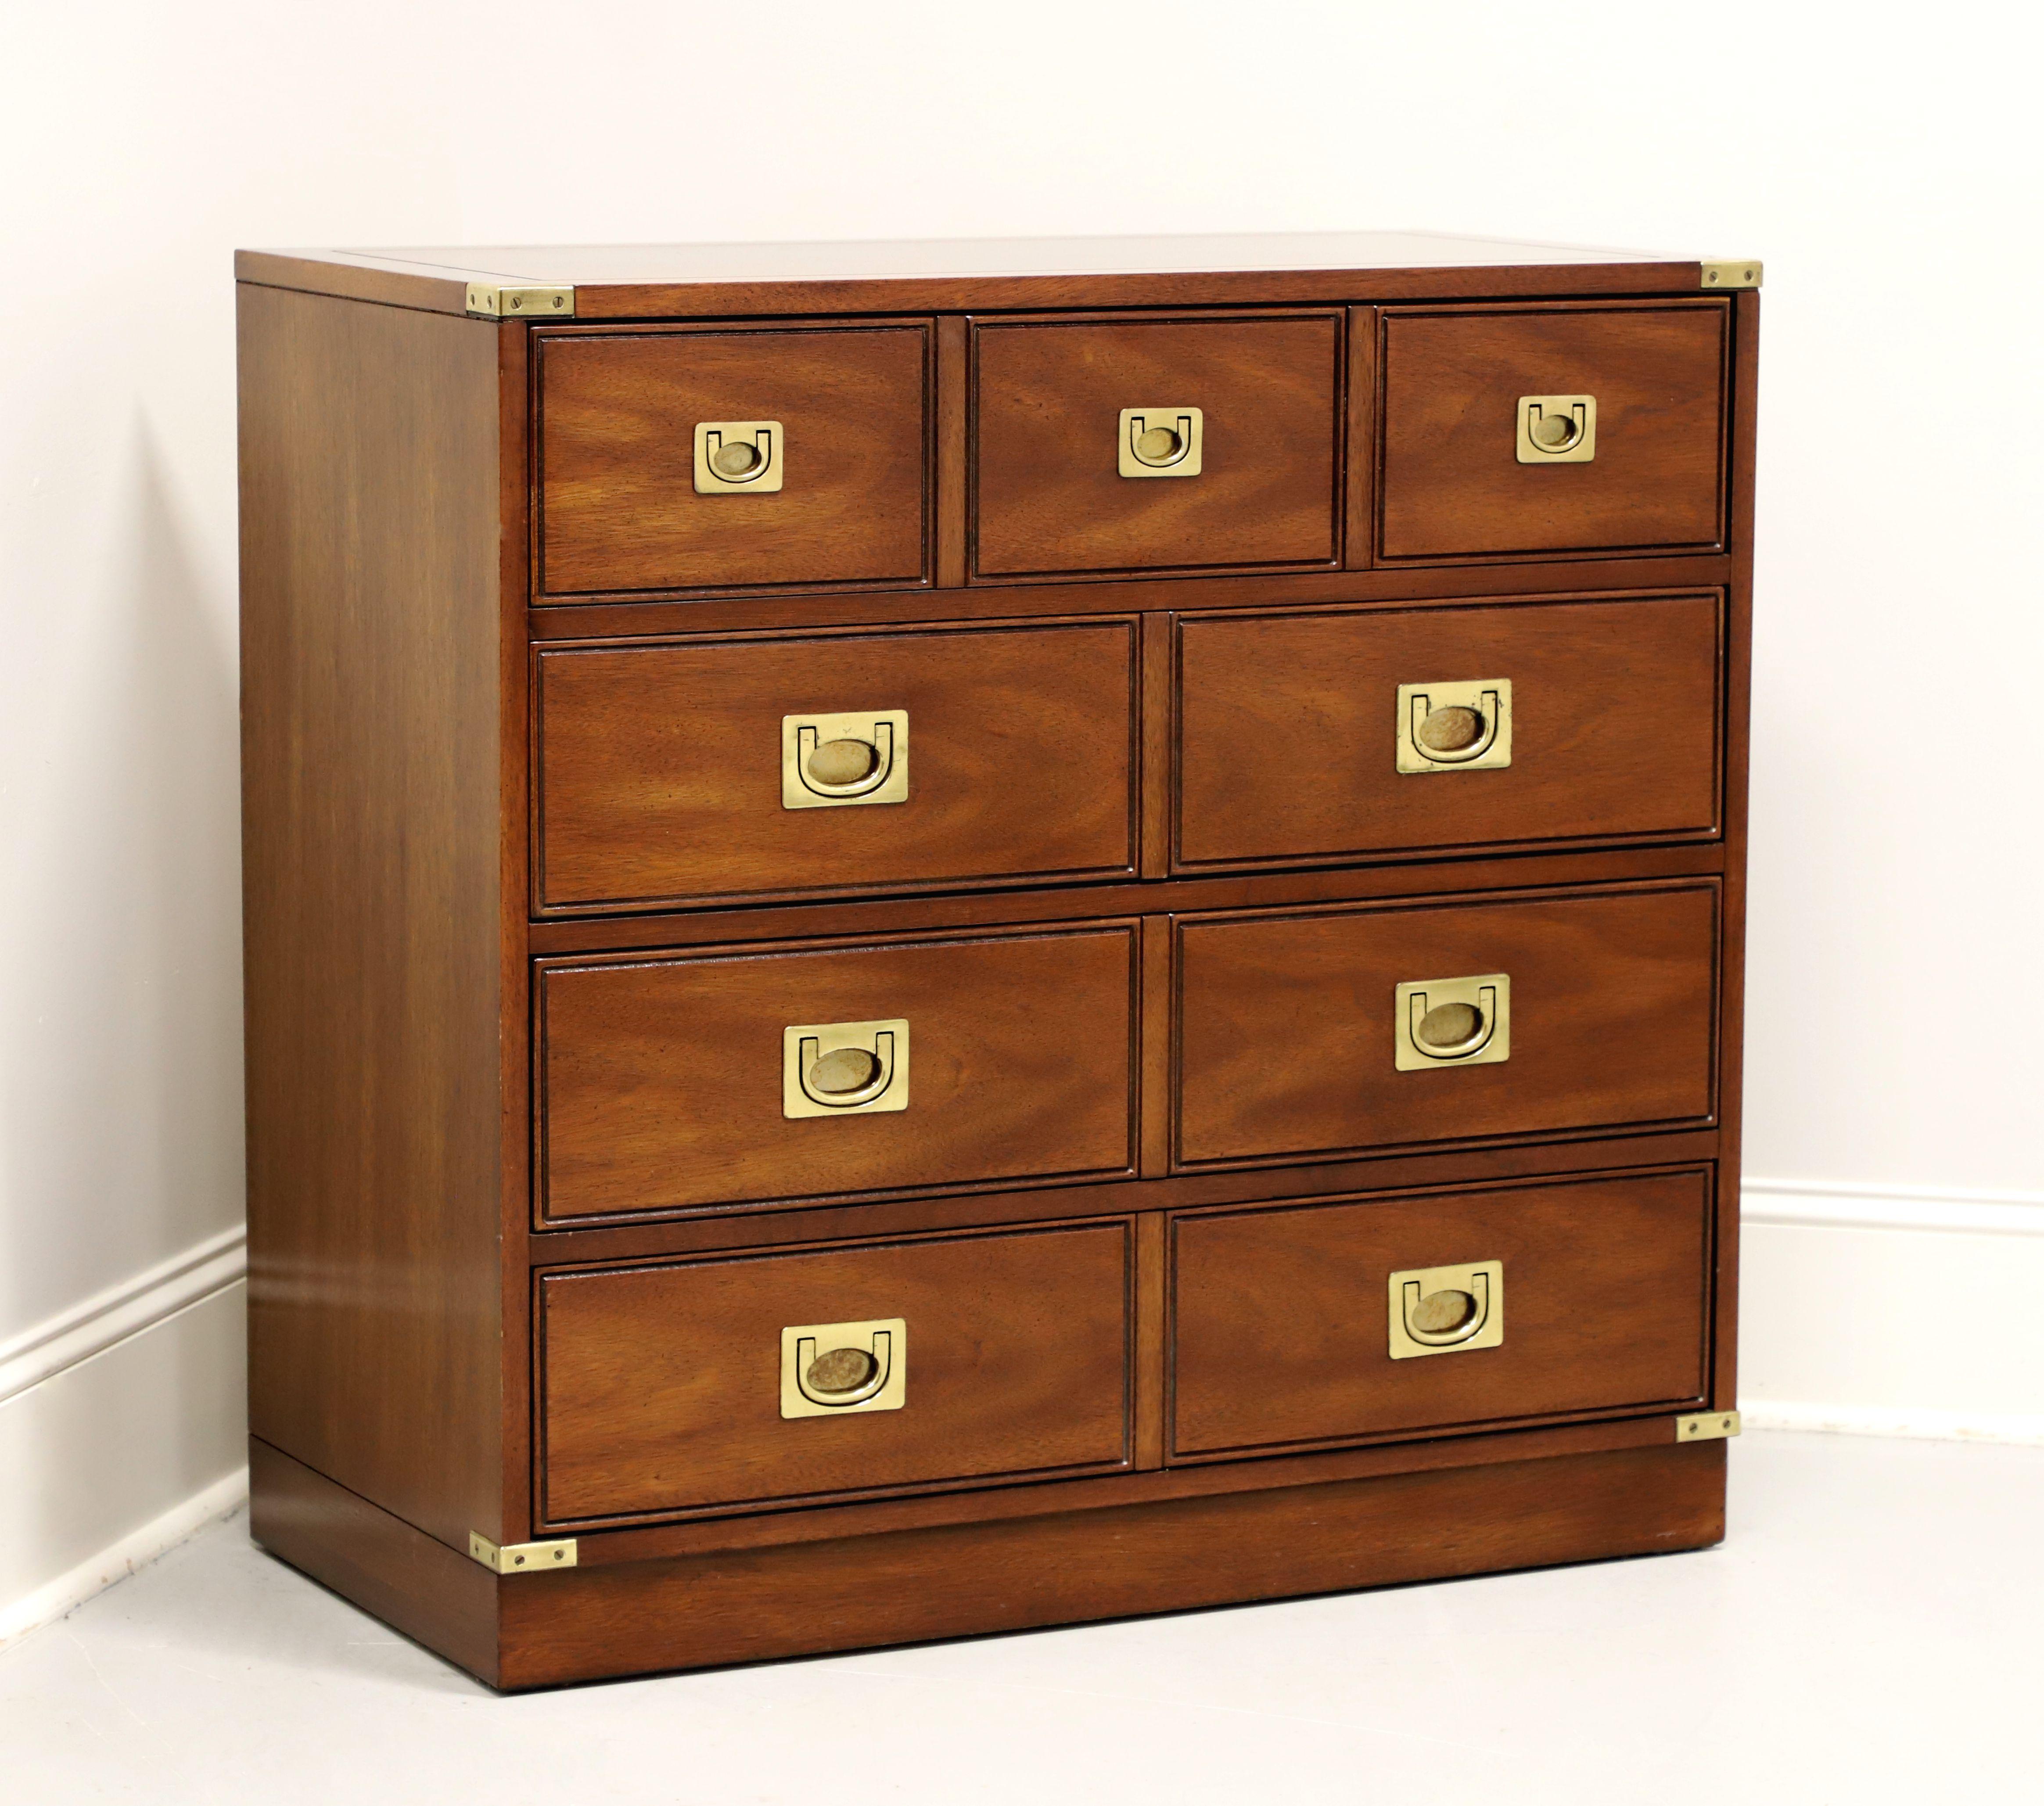 NATIONAL MT. AIRY Mahogany Campaign Style Bachelor Chest 6